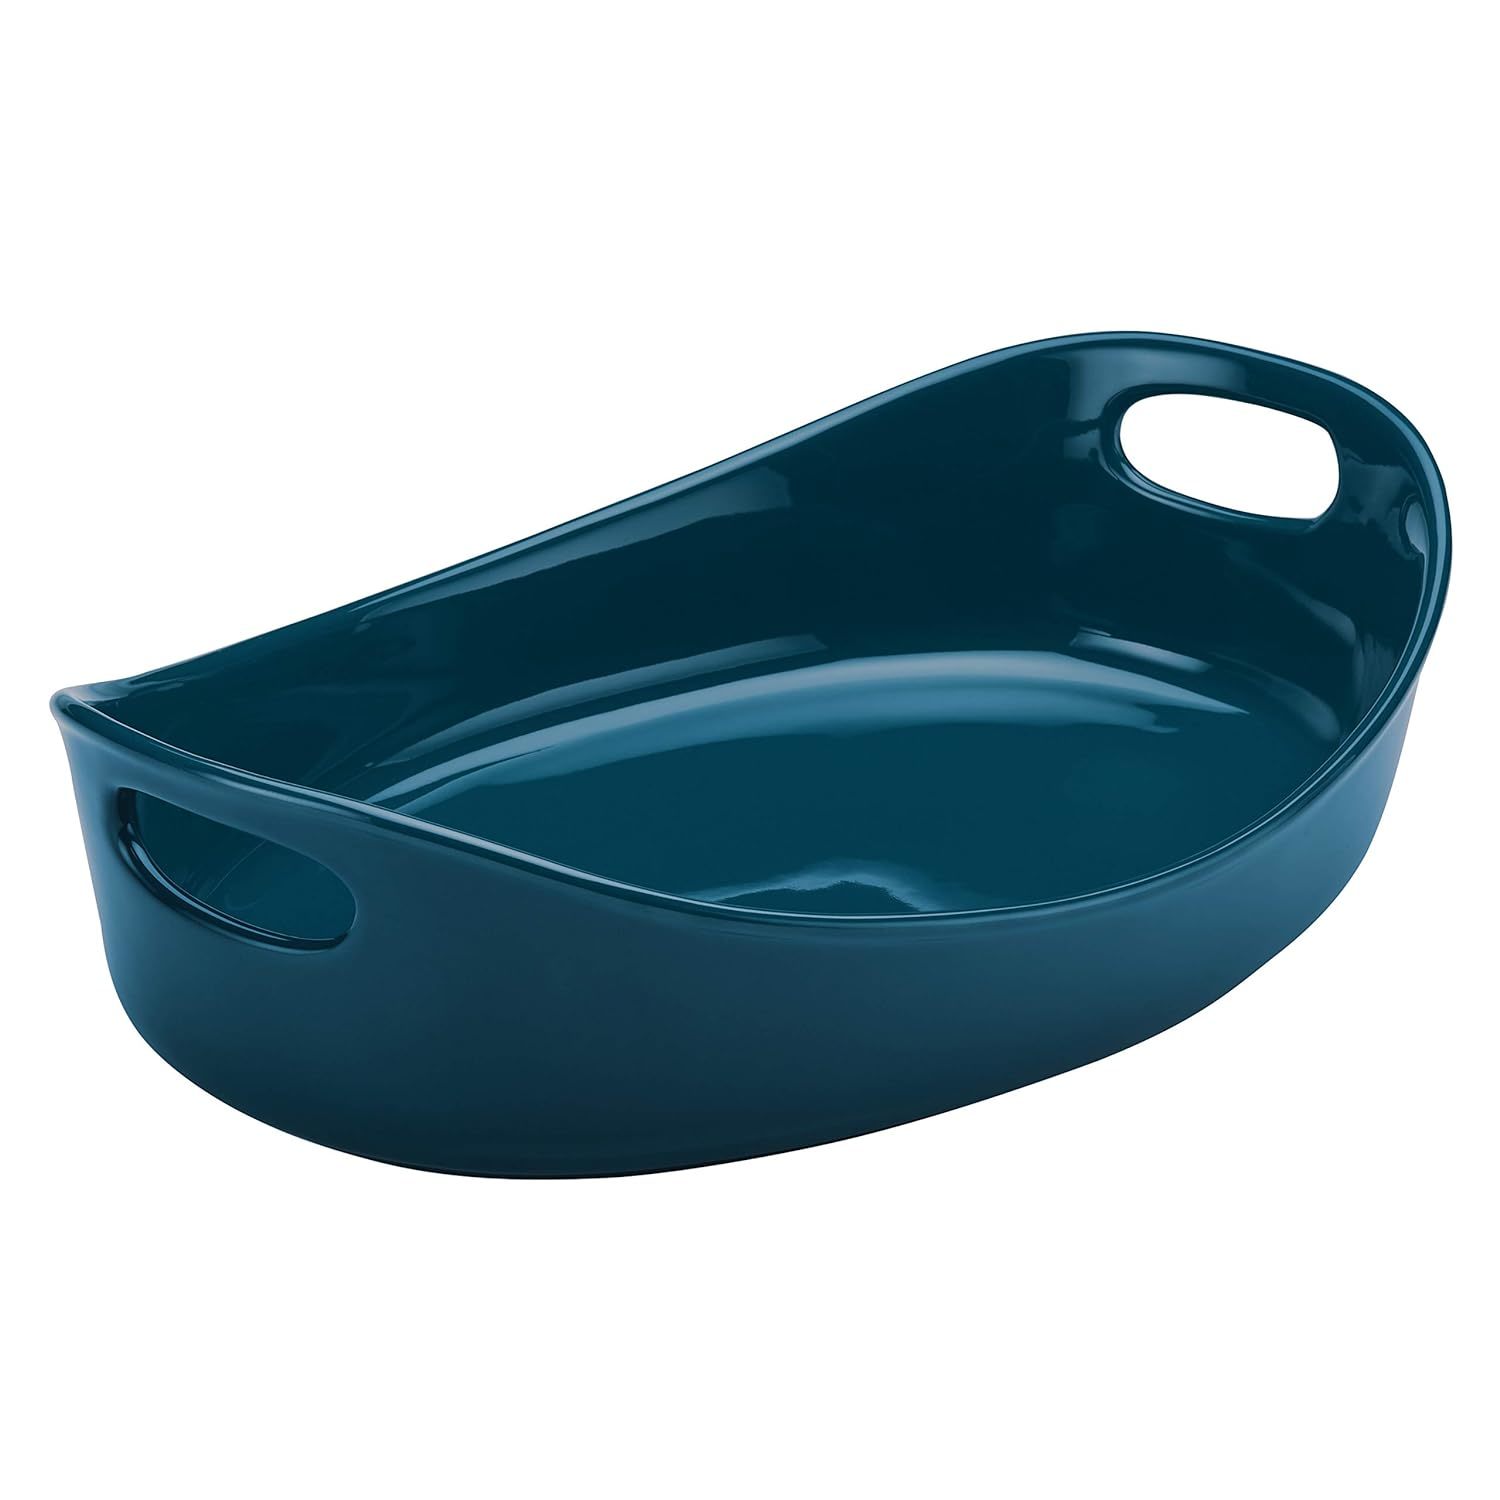 Rachael Ray Stoneware Bubble and Brown Oval Baker, 4.5-Quart, Marine Blue - $87.39